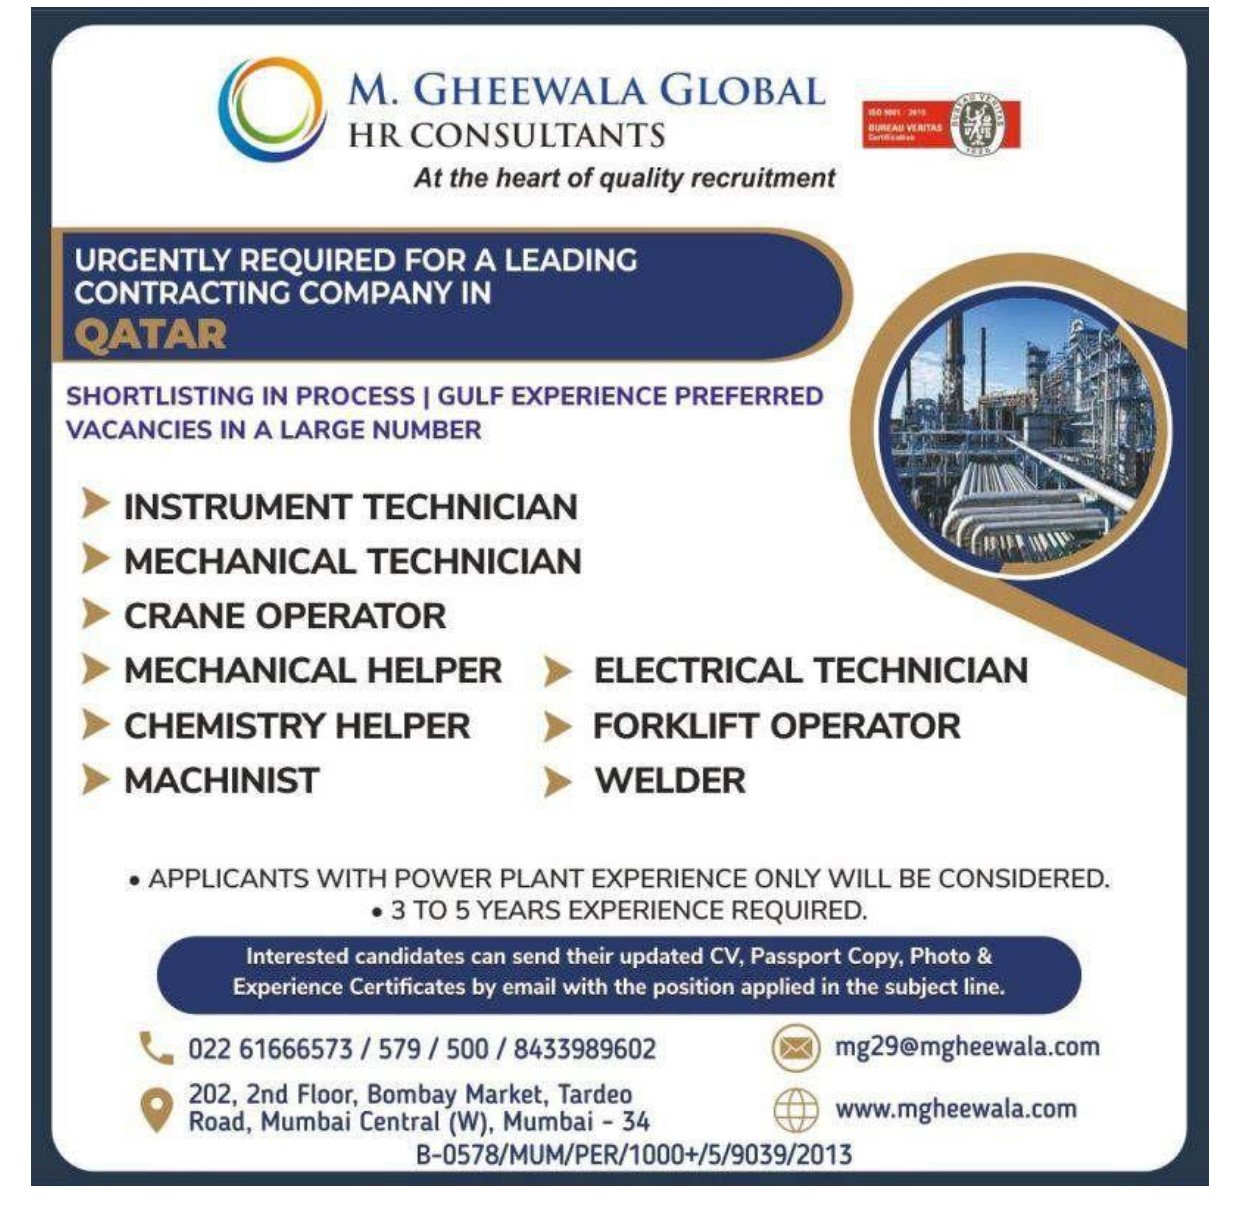 Looking Power Plant Exp. Candidates for Qatar